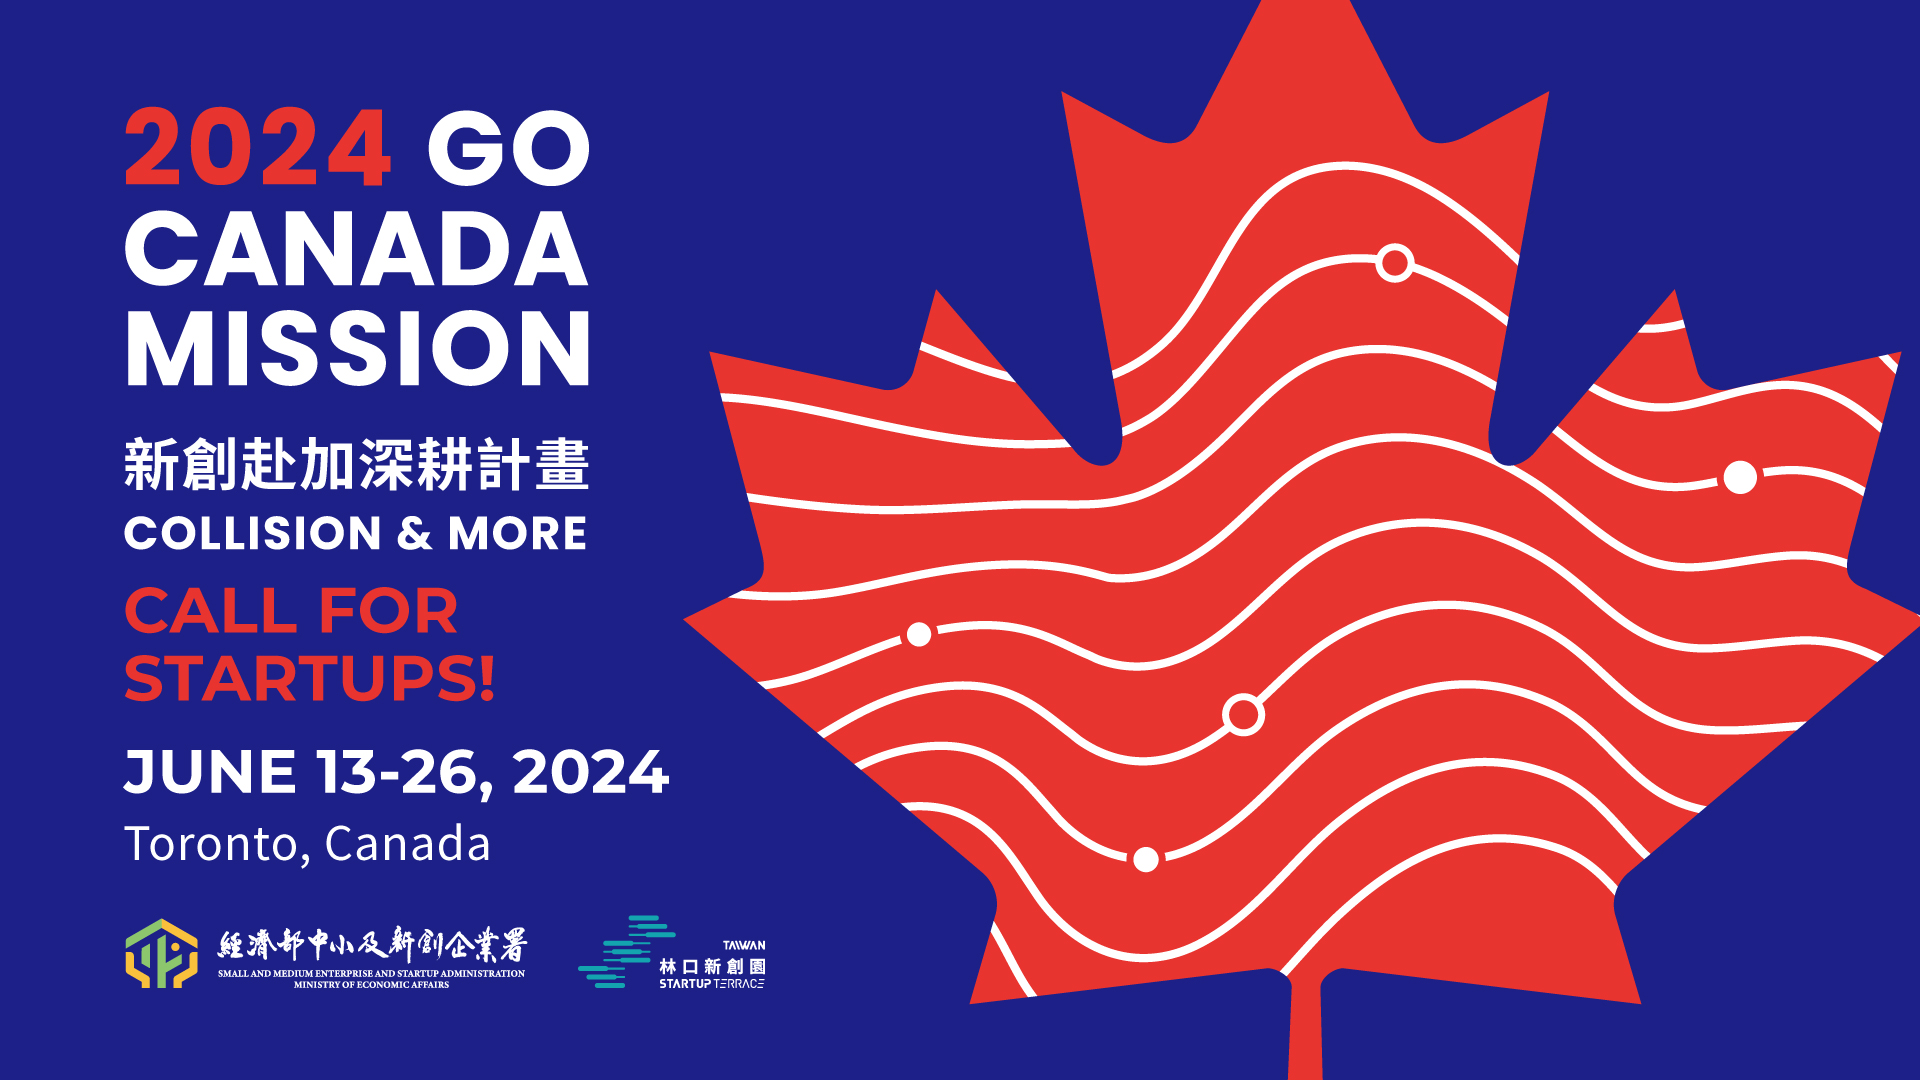 GO Canada Mission Now Calling for Taiwan startups!